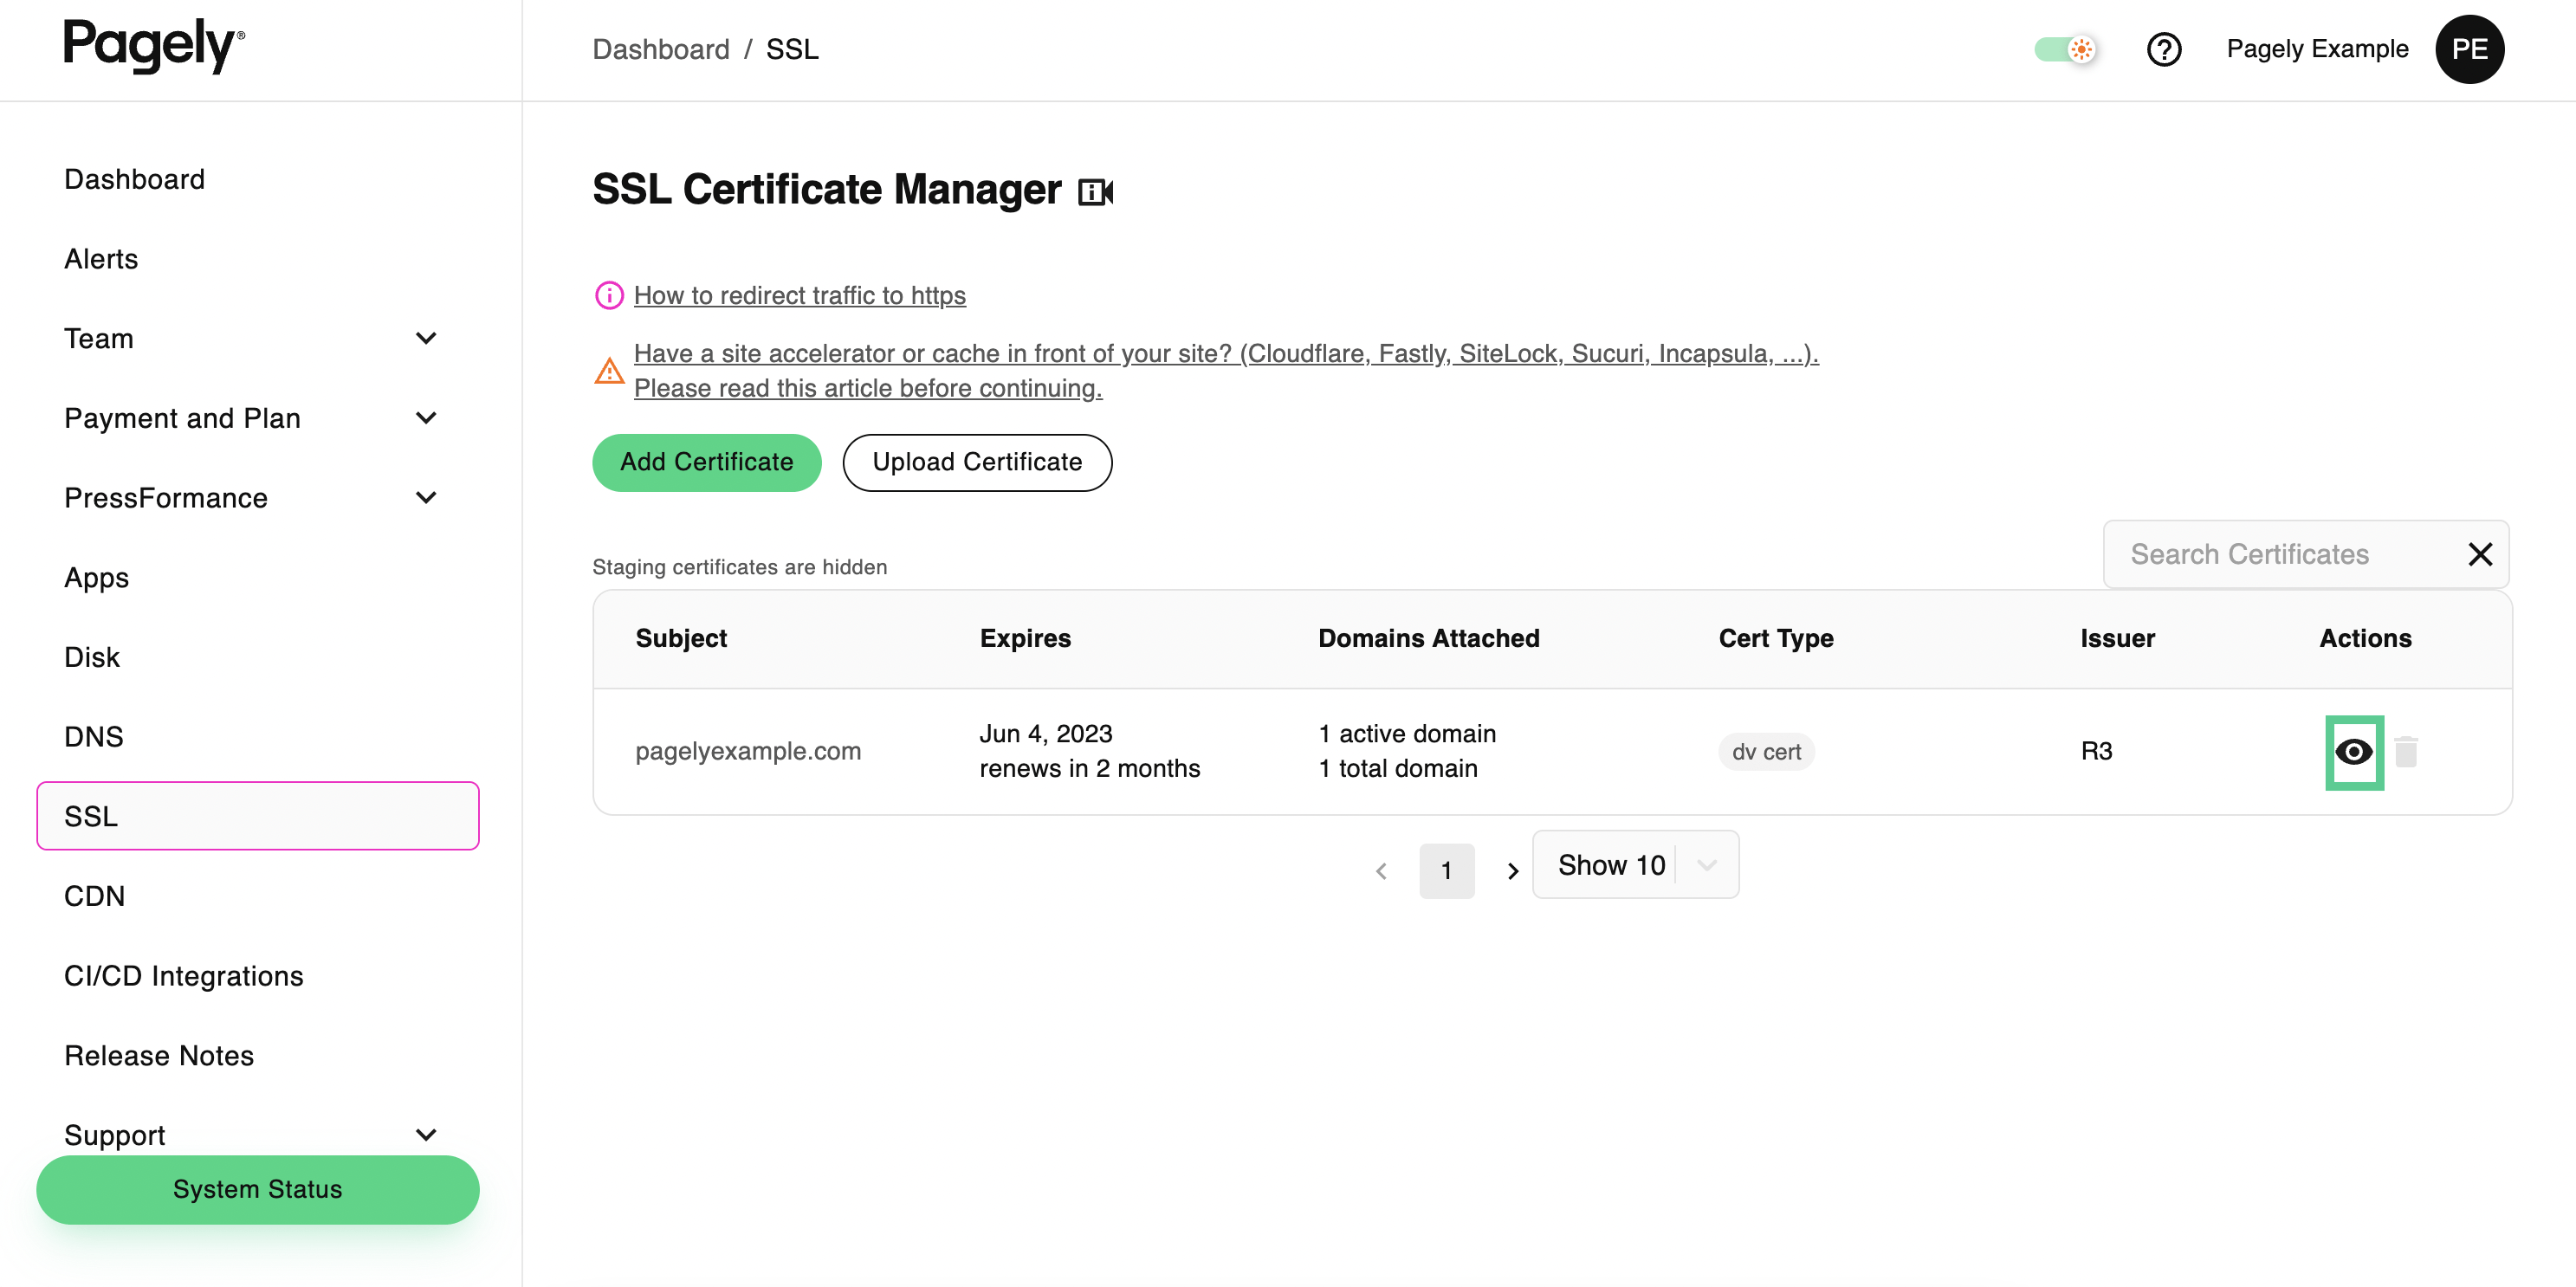 SSL Certificate Manager View action button